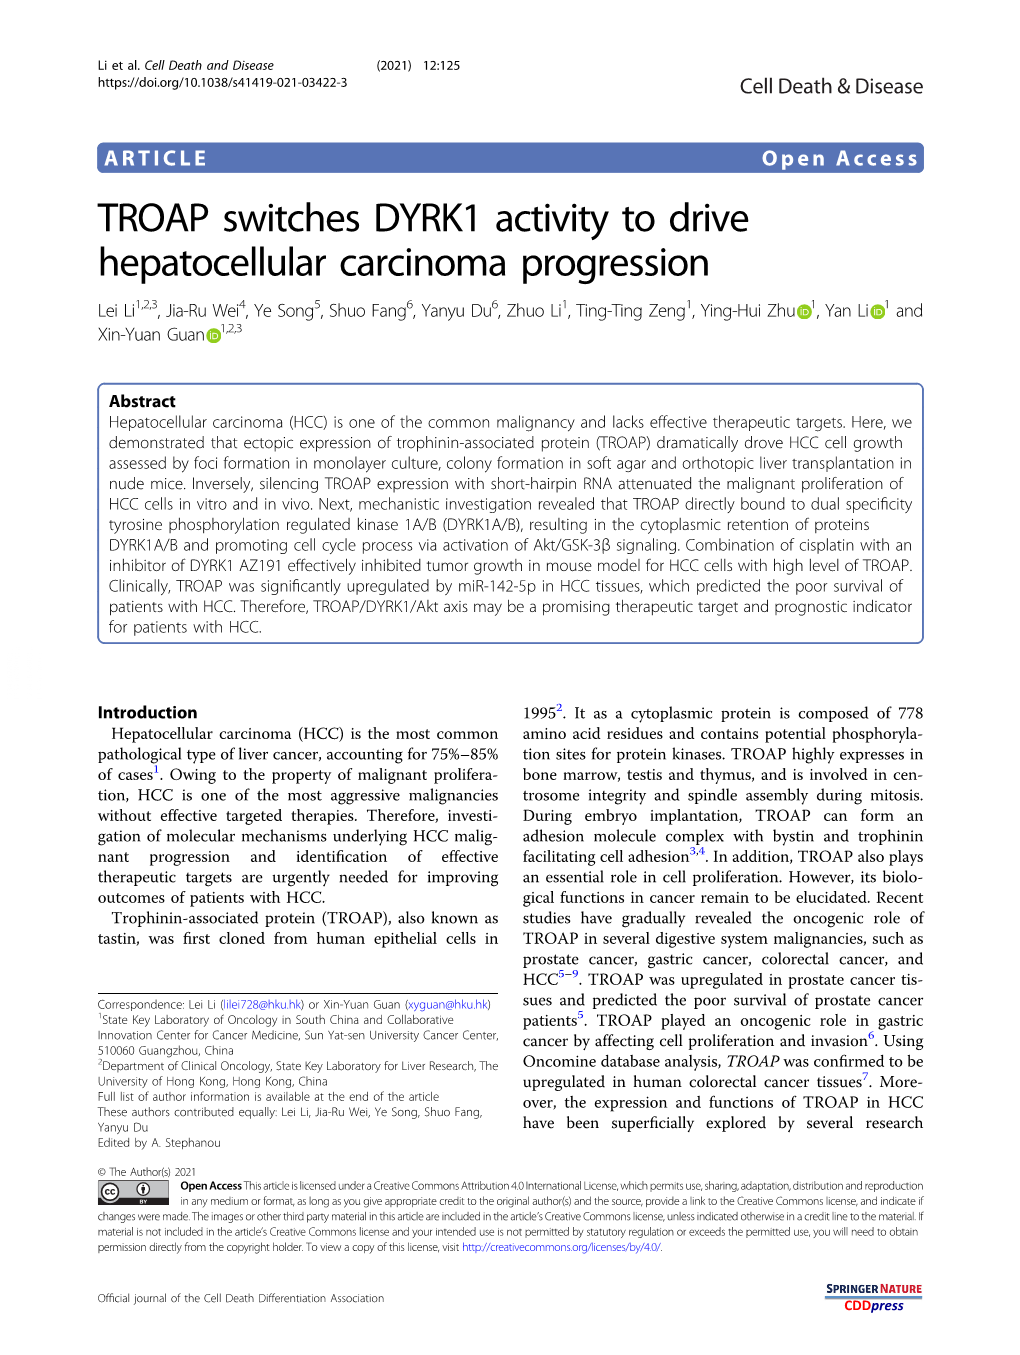 TROAP Switches DYRK1 Activity to Drive Hepatocellular Carcinoma